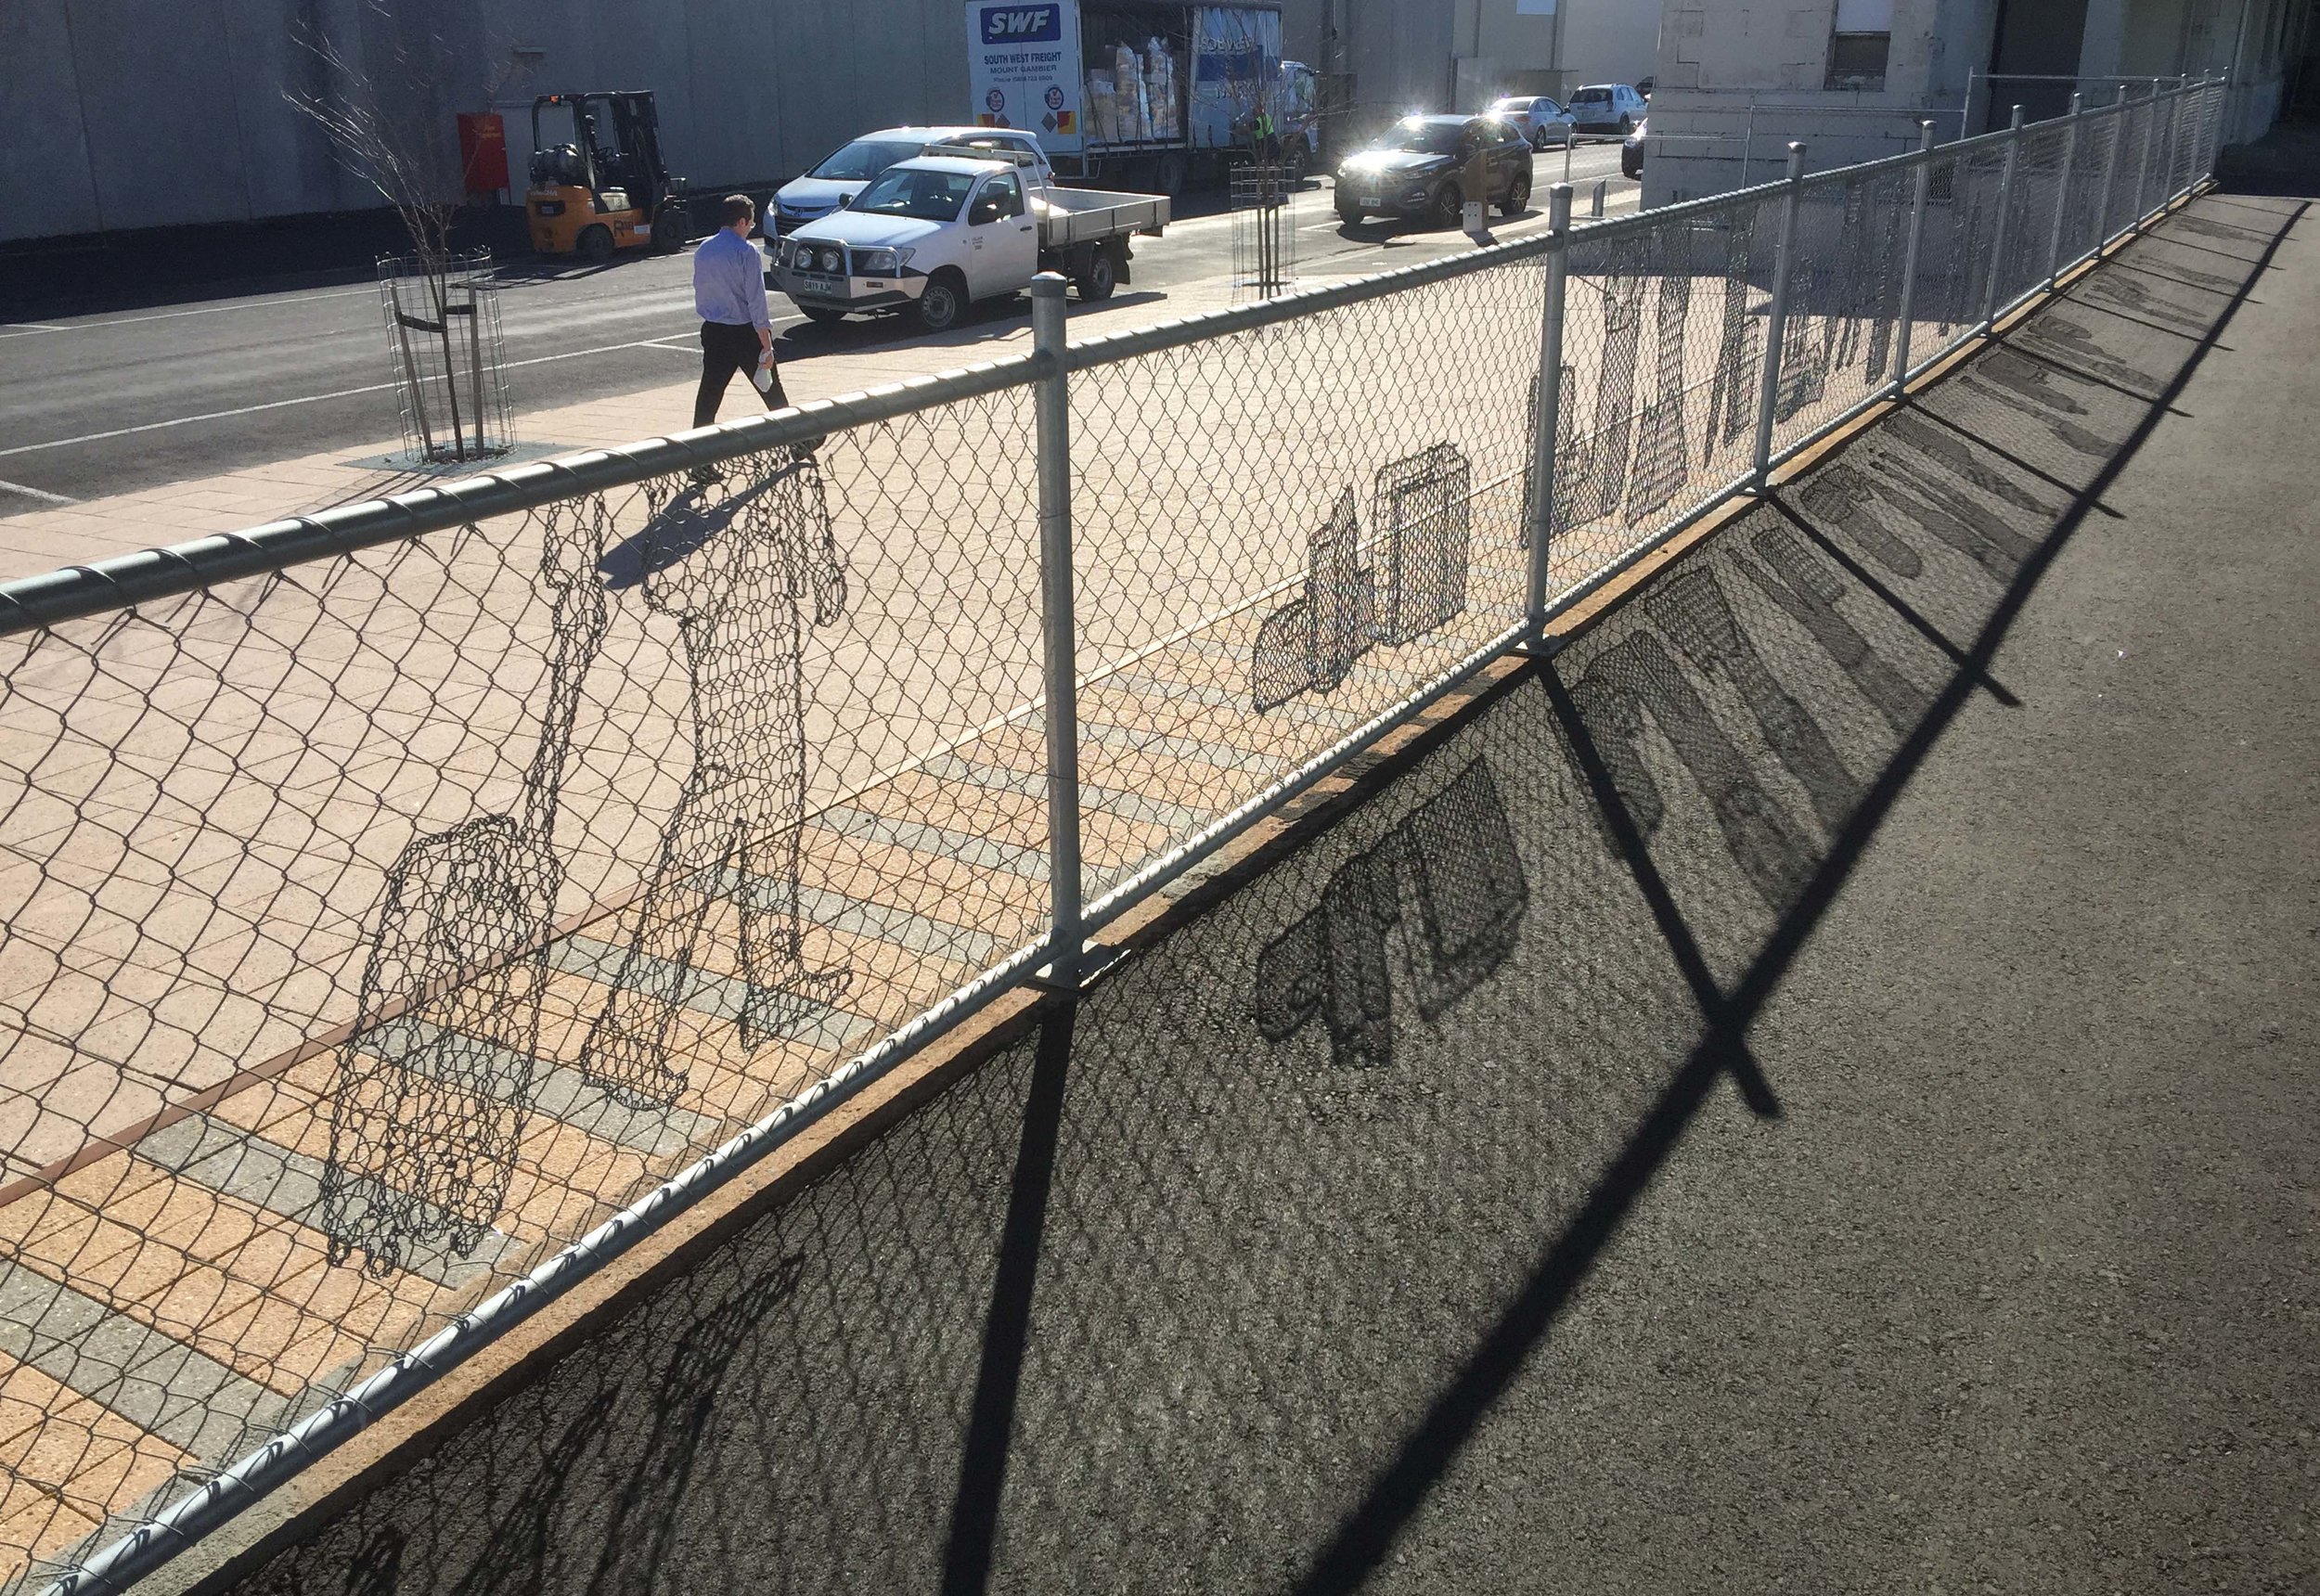   Lace Fence  2015  Permanent public artwork commissioned by Mt Gambier Council.  This artistic design portrays both the modern and historical train platform. Figures can be seen walking, waiting and cleaning the station platform. Other objects are d